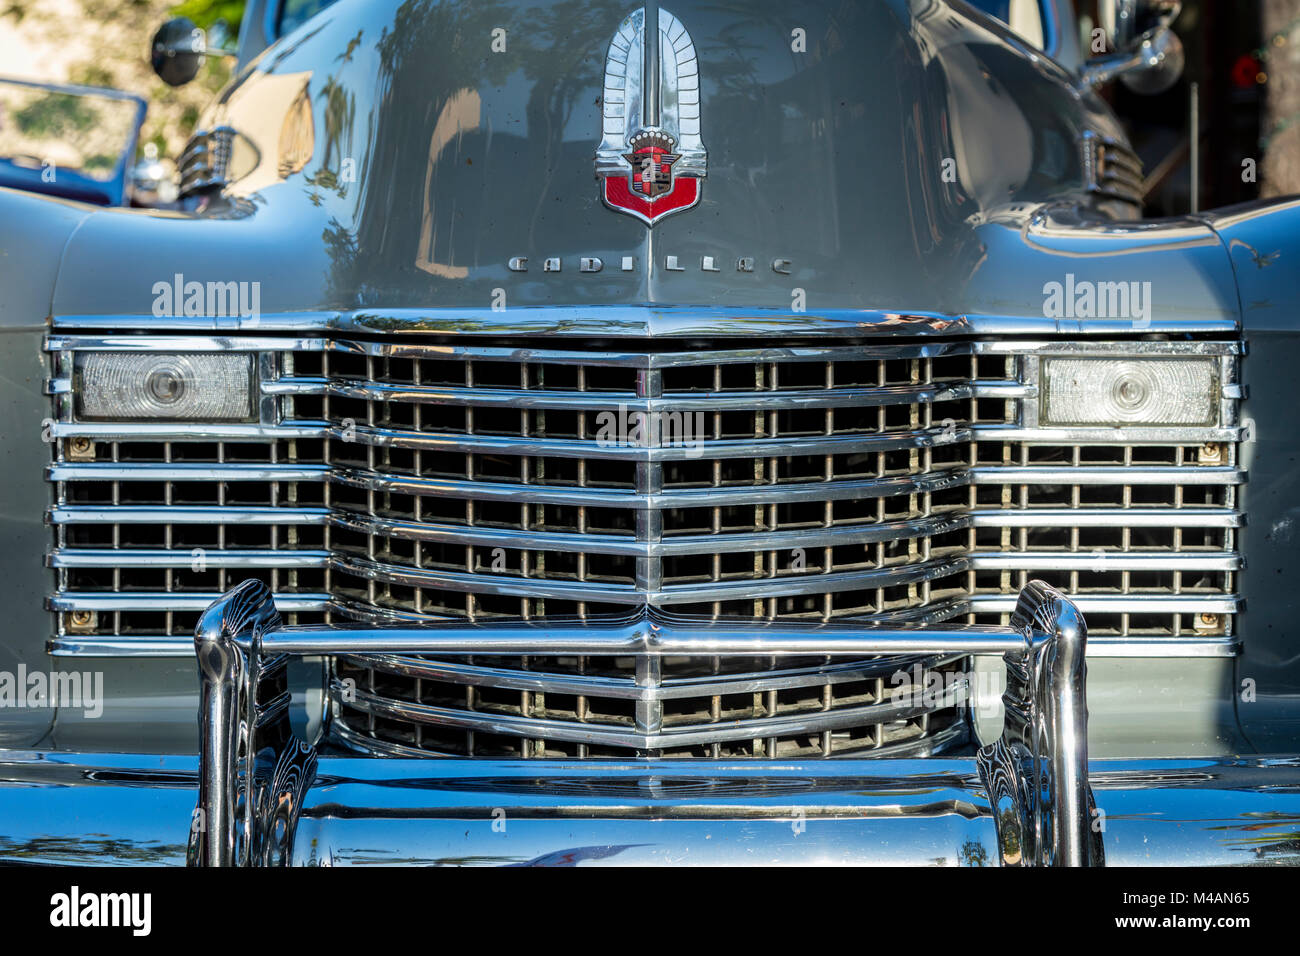 Front grill of a 1941 Cadillac on display at 'Cars on 5th' autoshow, Naples, Florida, USA Stock Photo